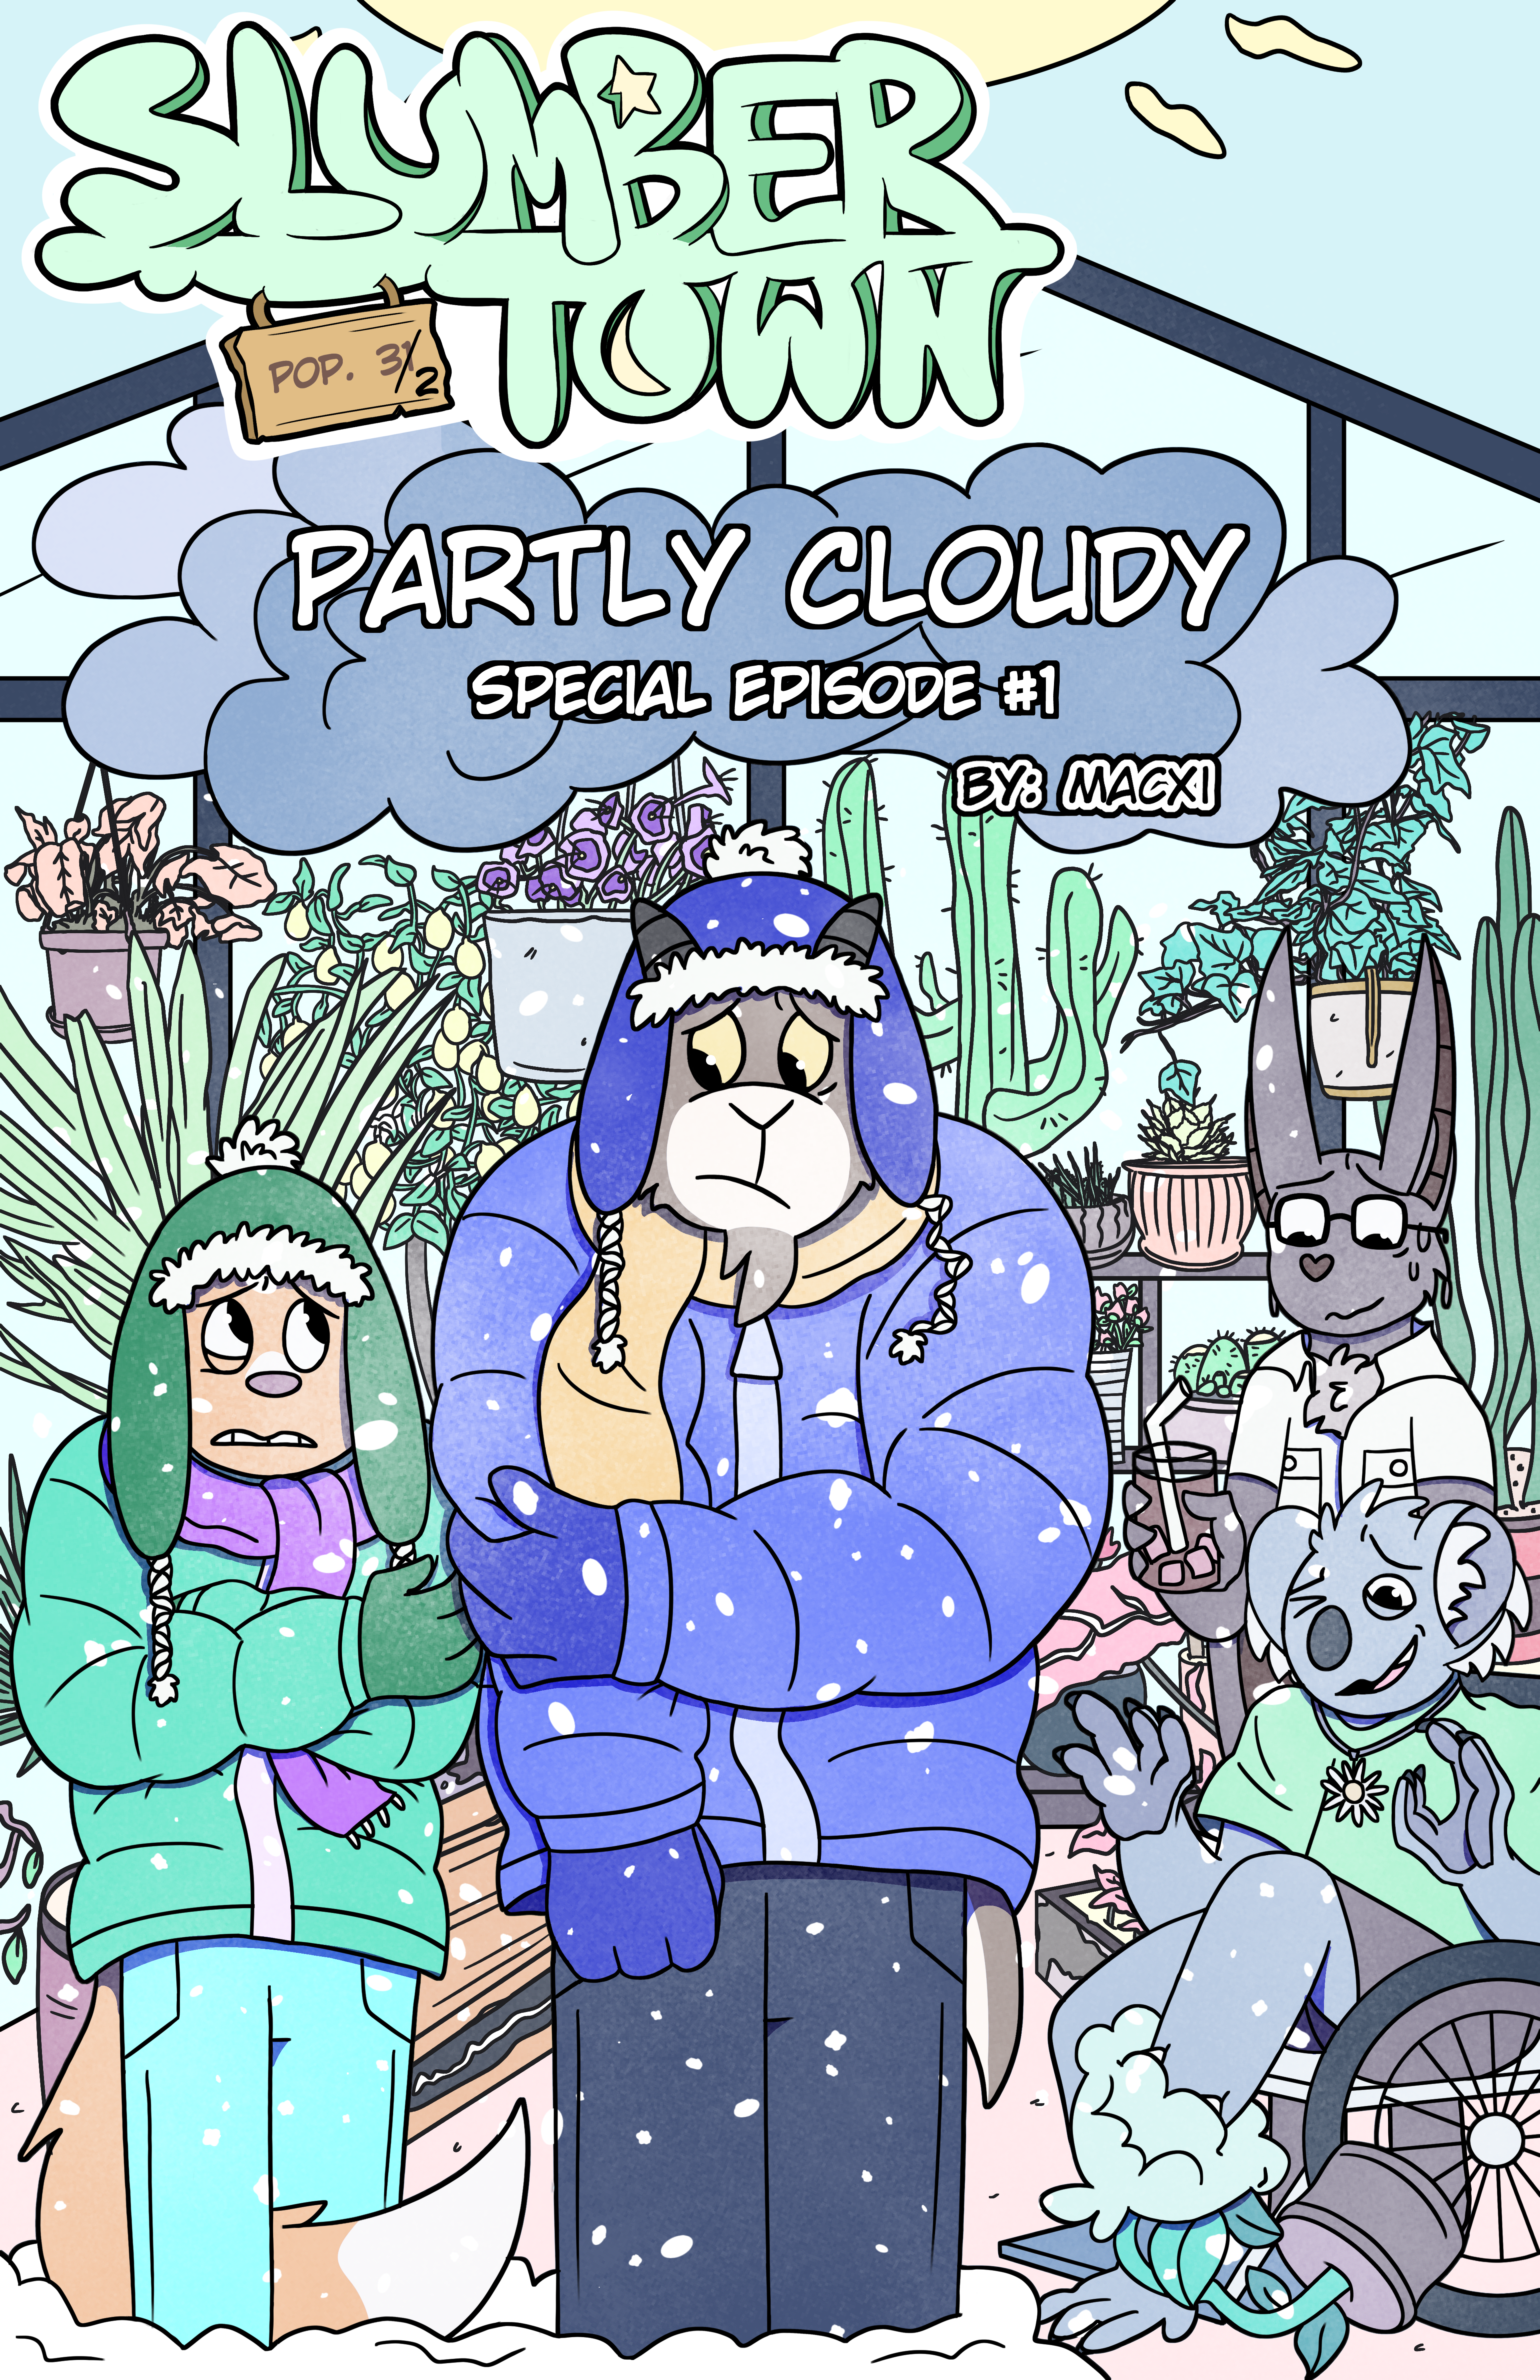 Special Episode #1: Partly Cloudy